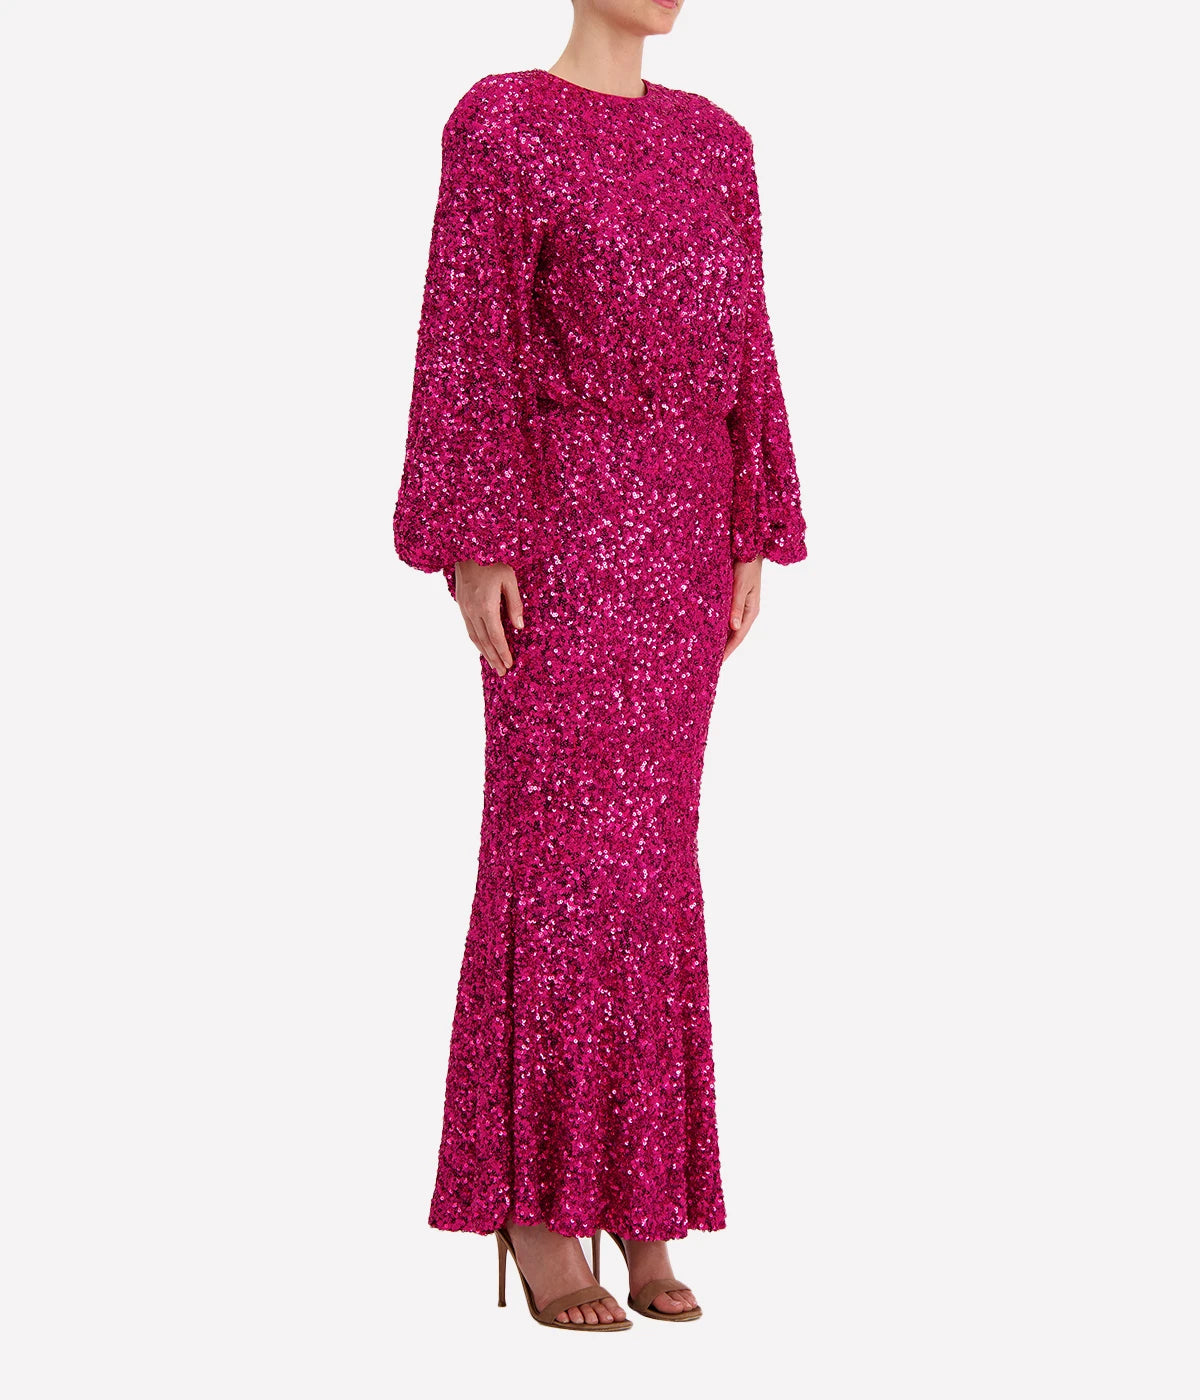 Sequin Maxi Dress in Pink Glo